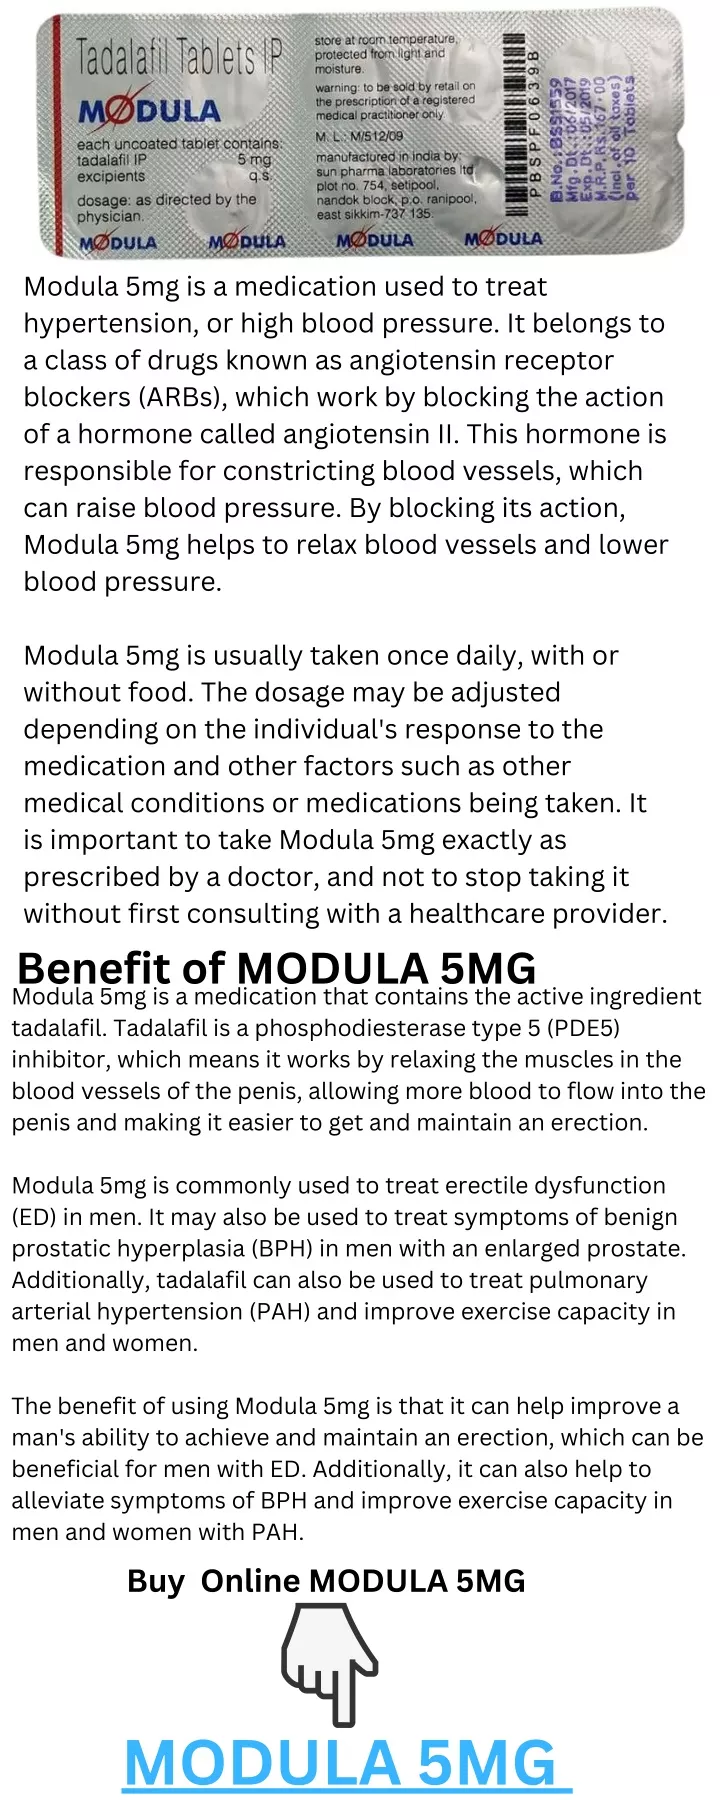 modula 5mg is a medication used to treat